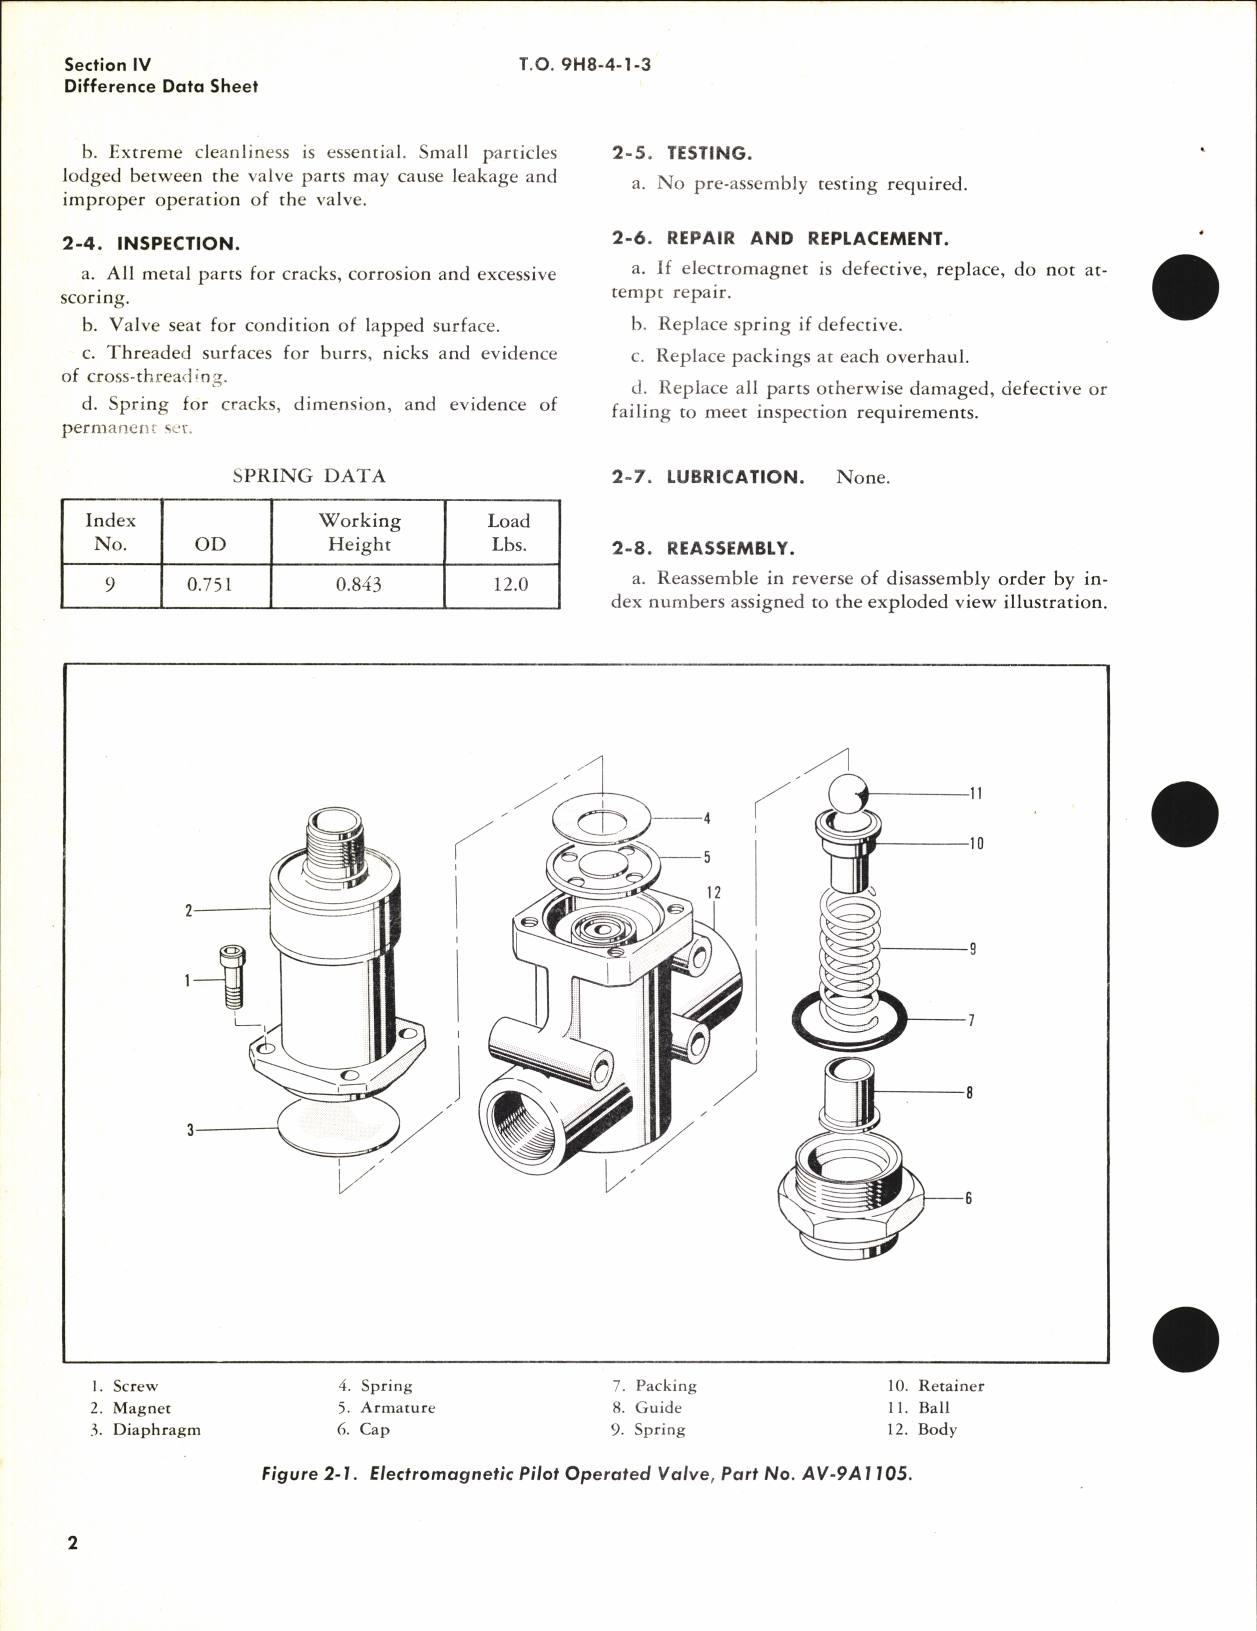 Sample page 6 from AirCorps Library document: Overhaul Instructions for Electromagnetic Pilot Operated Valve Av-9 Series, Part no. Av-9A1105 and Similar Valves